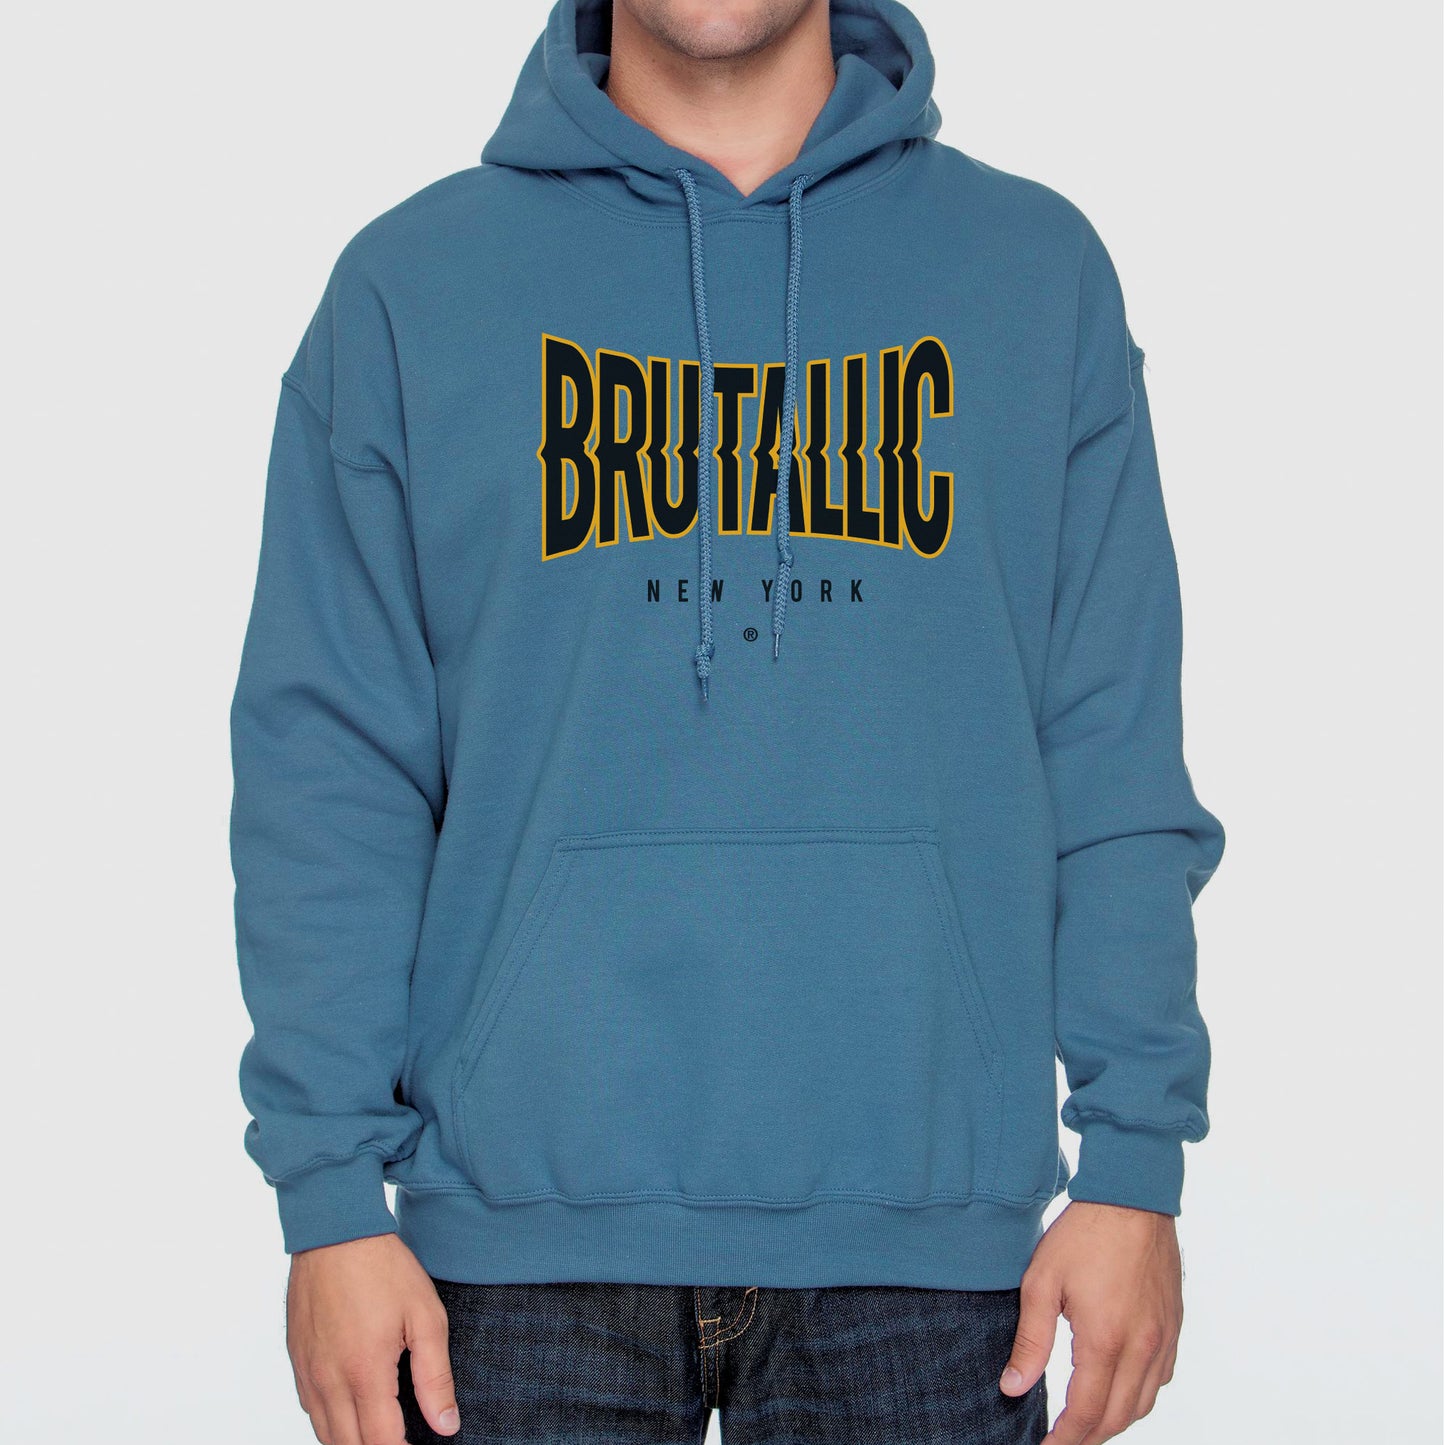 indigo blue hoodie sweatshirt worn by male model front view with disrupted brutallic logo